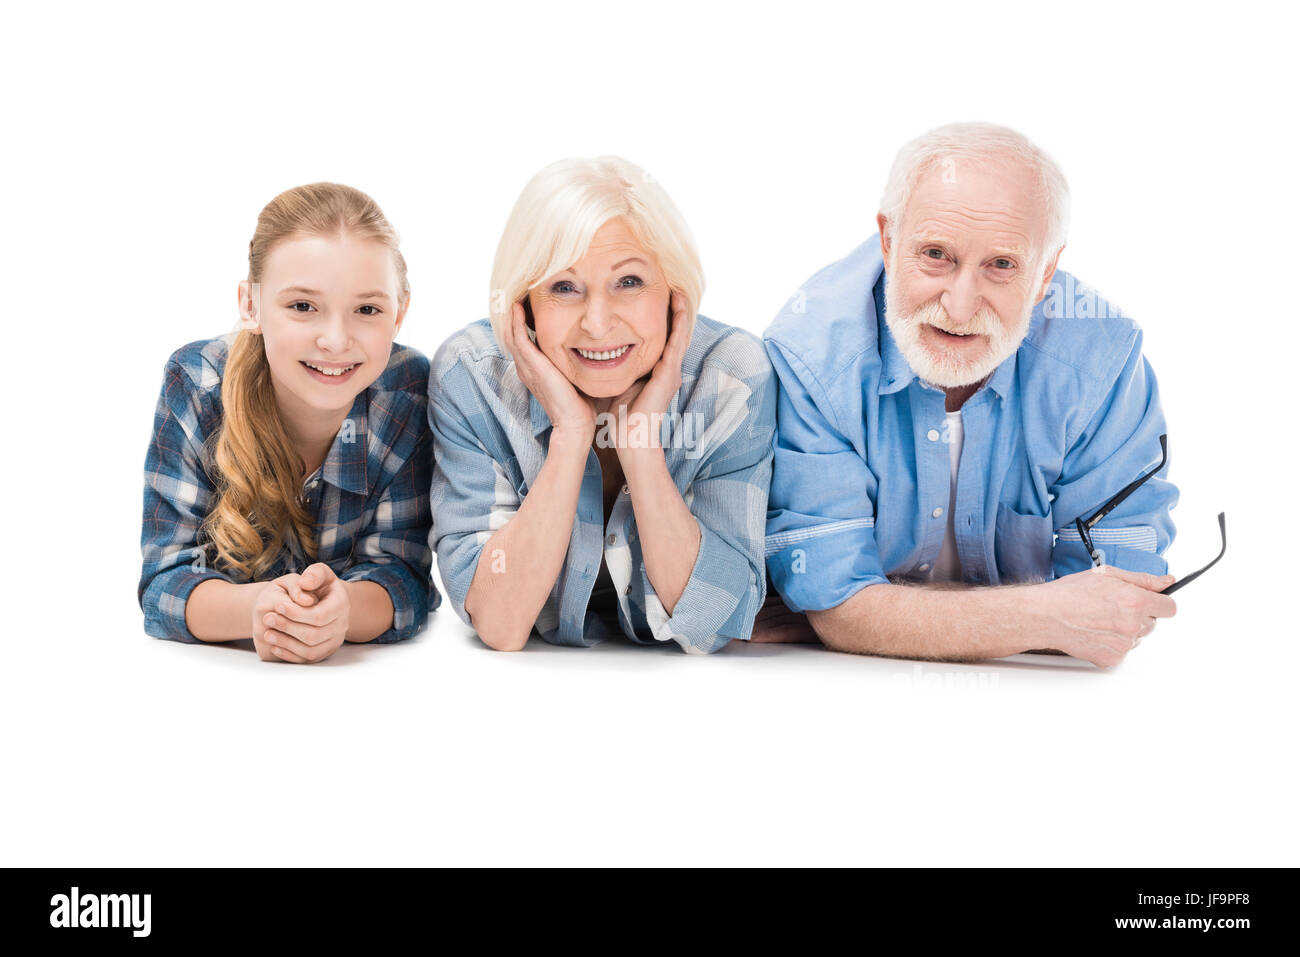 Grand-père, la grand-mère et petite-fille lying together isolated on white Banque D'Images